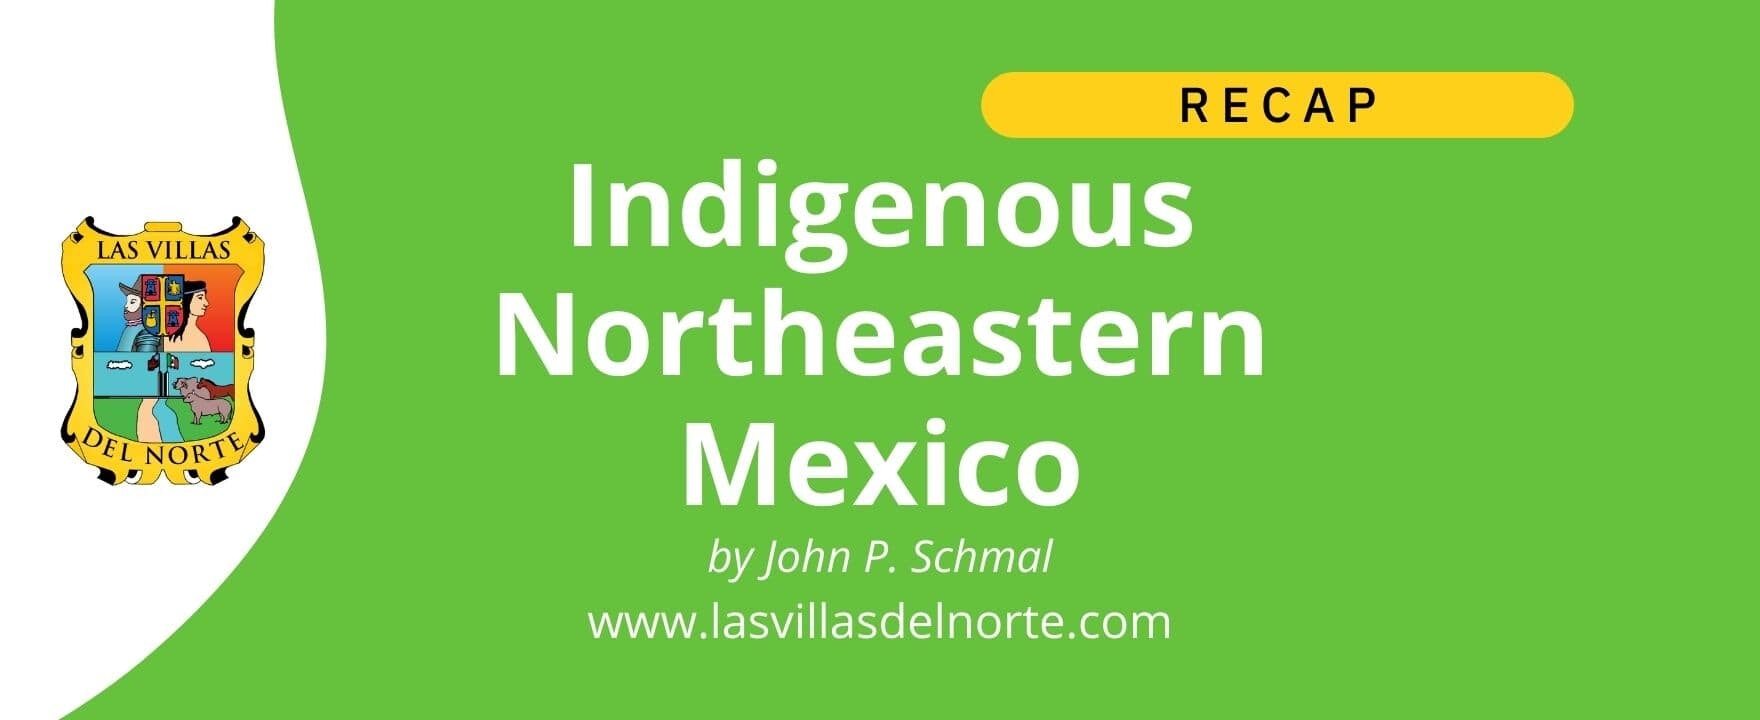 Indigenous Northeastern Mexico